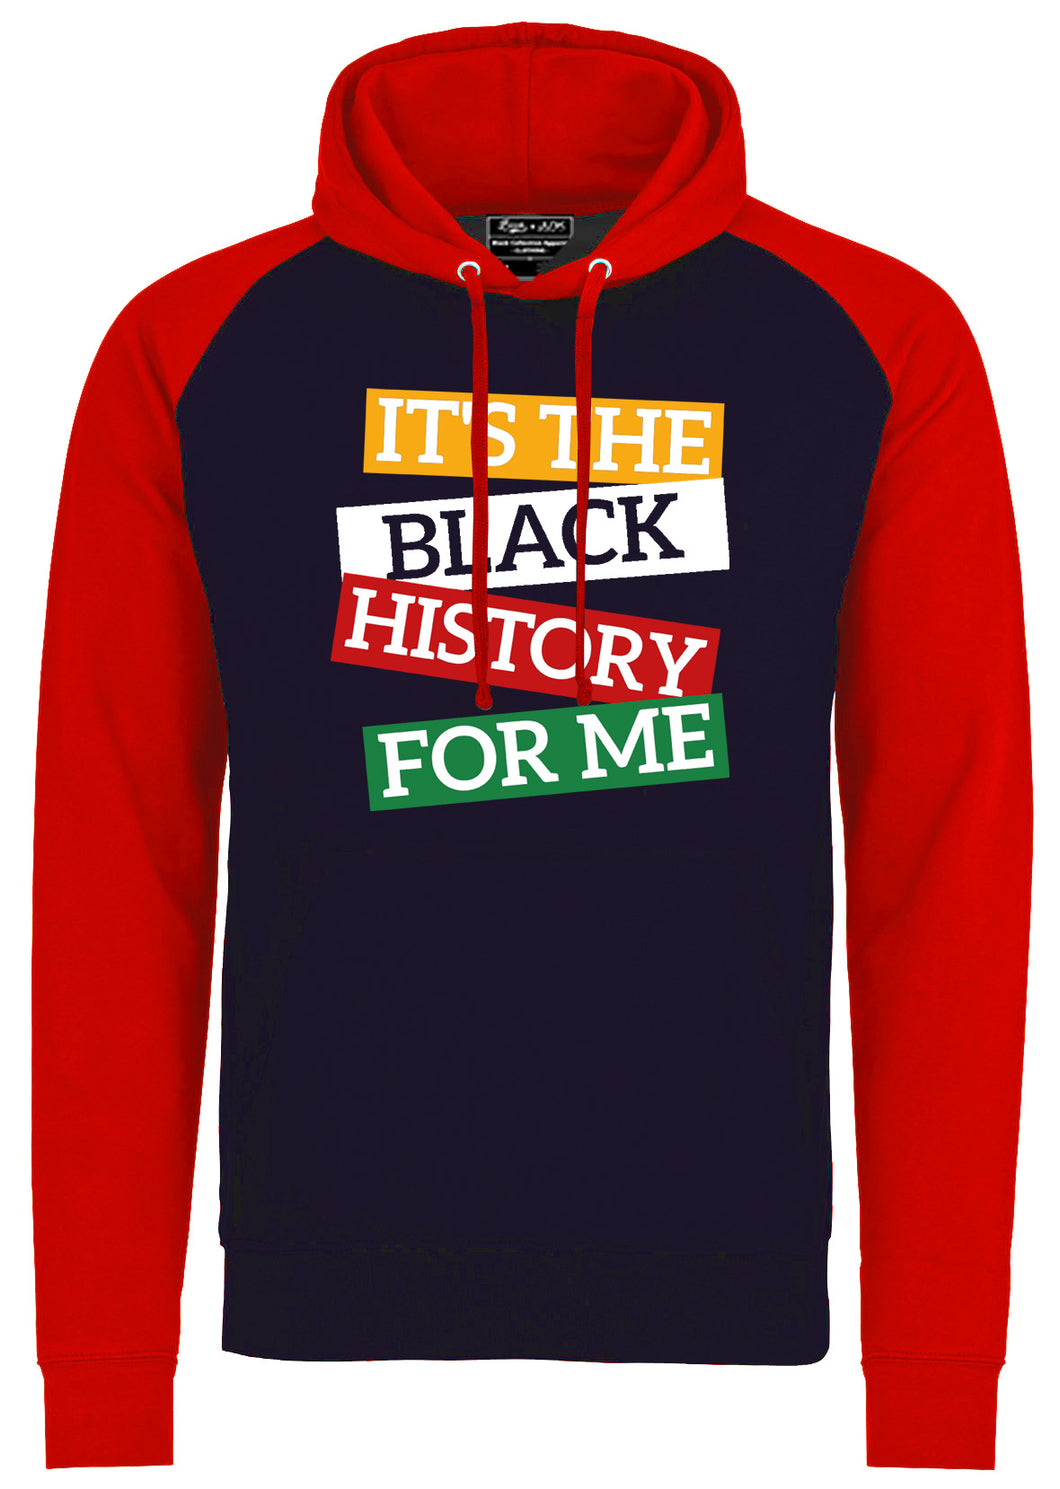 ITS THE BLACK HISTORY FOR ME Hoodie